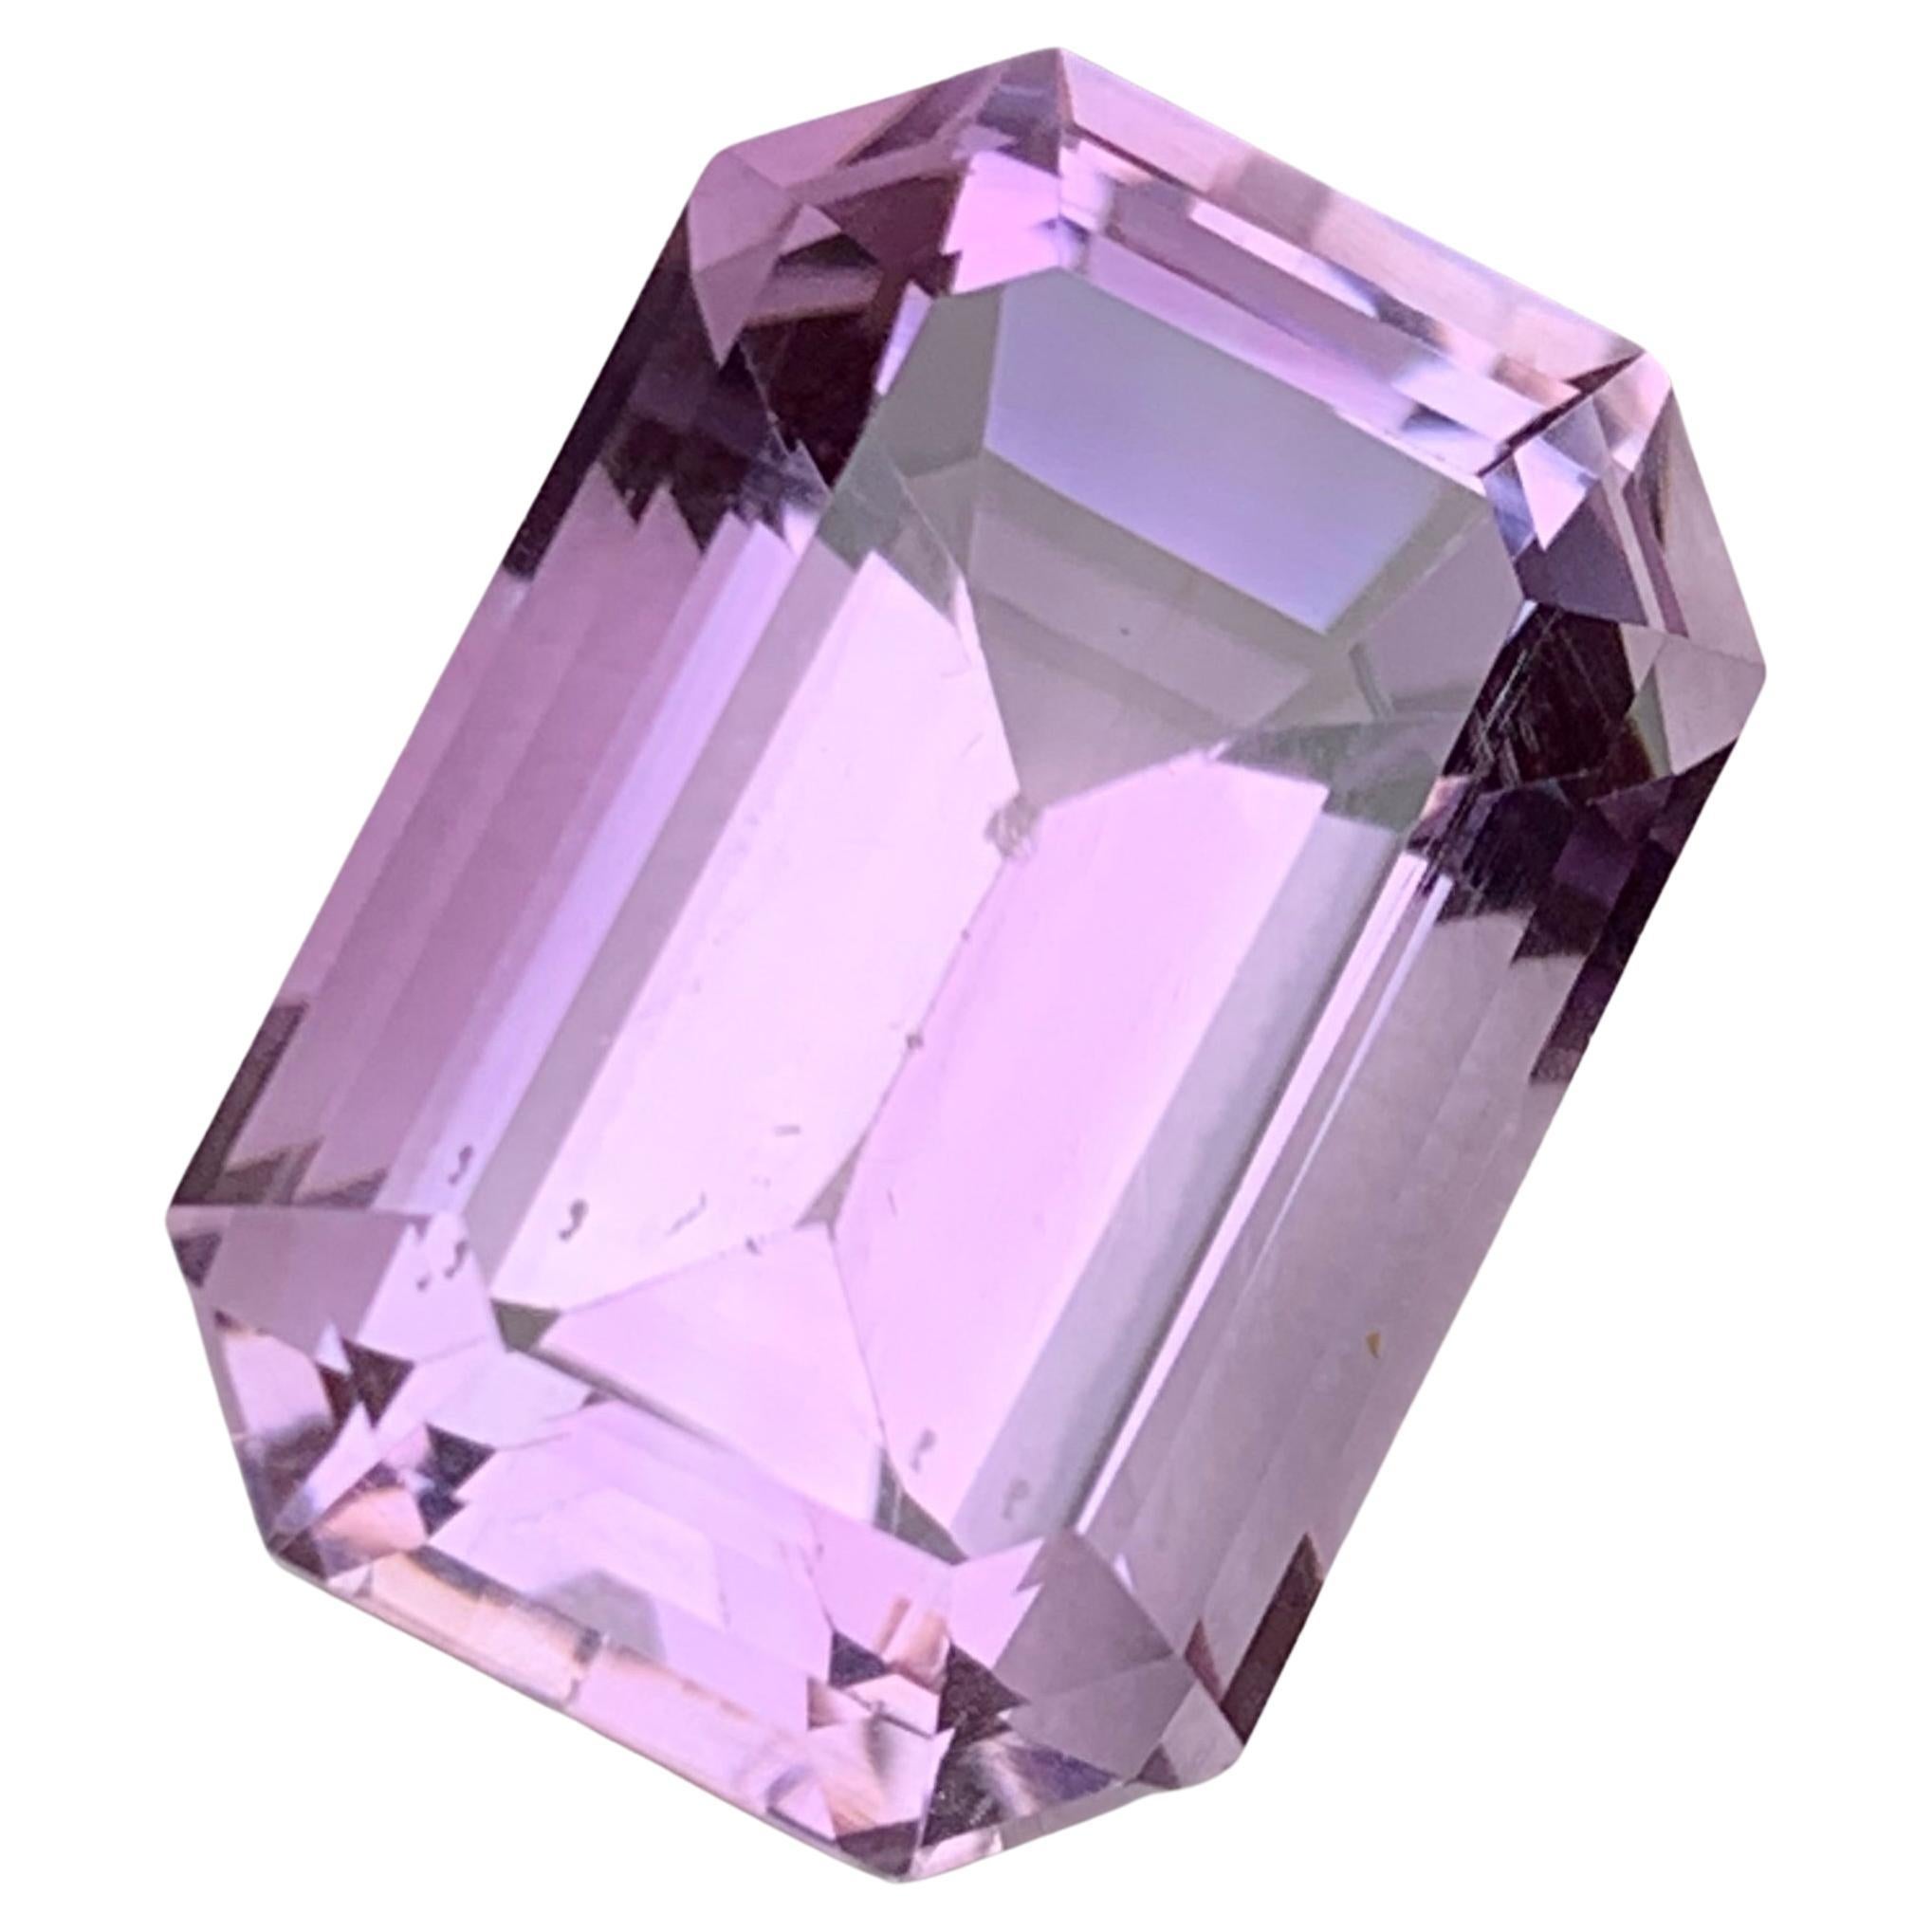 What is amethyst used for jewelry?